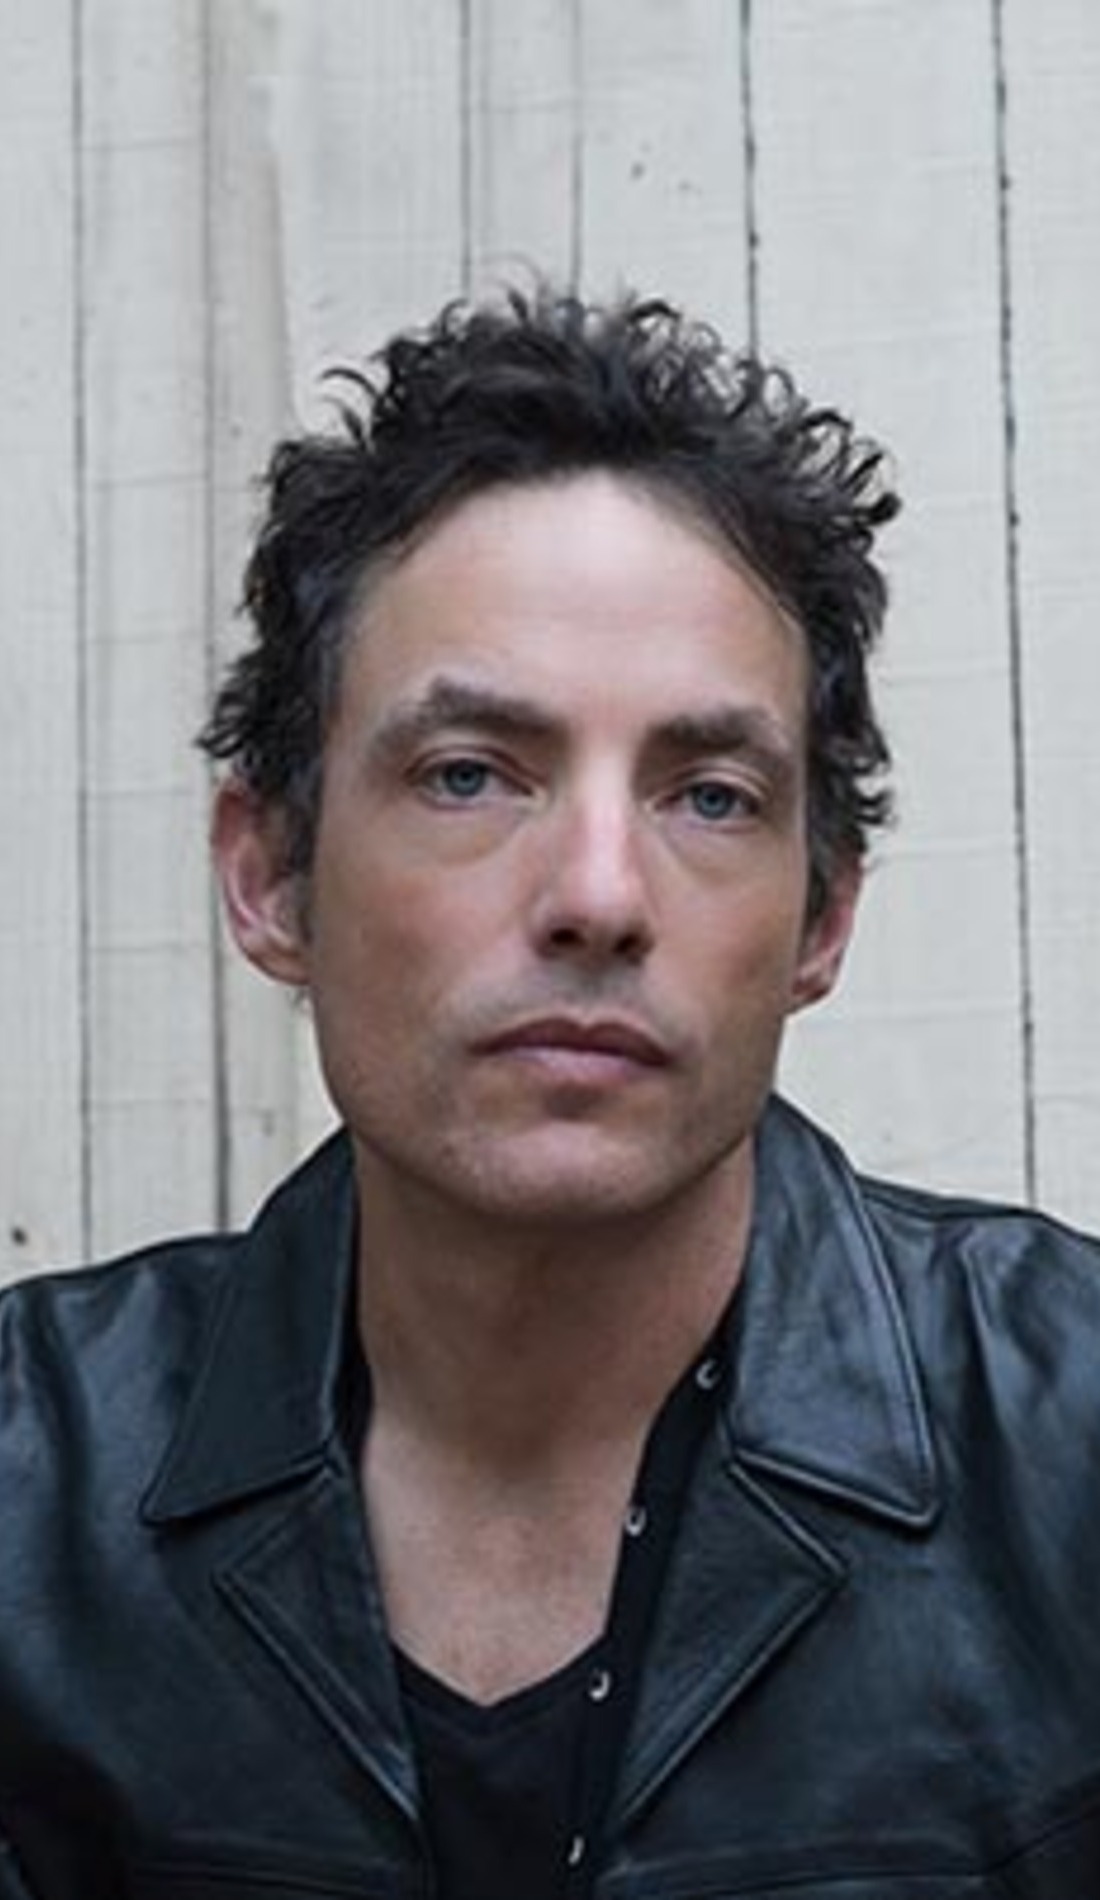 A The Wallflowers live event